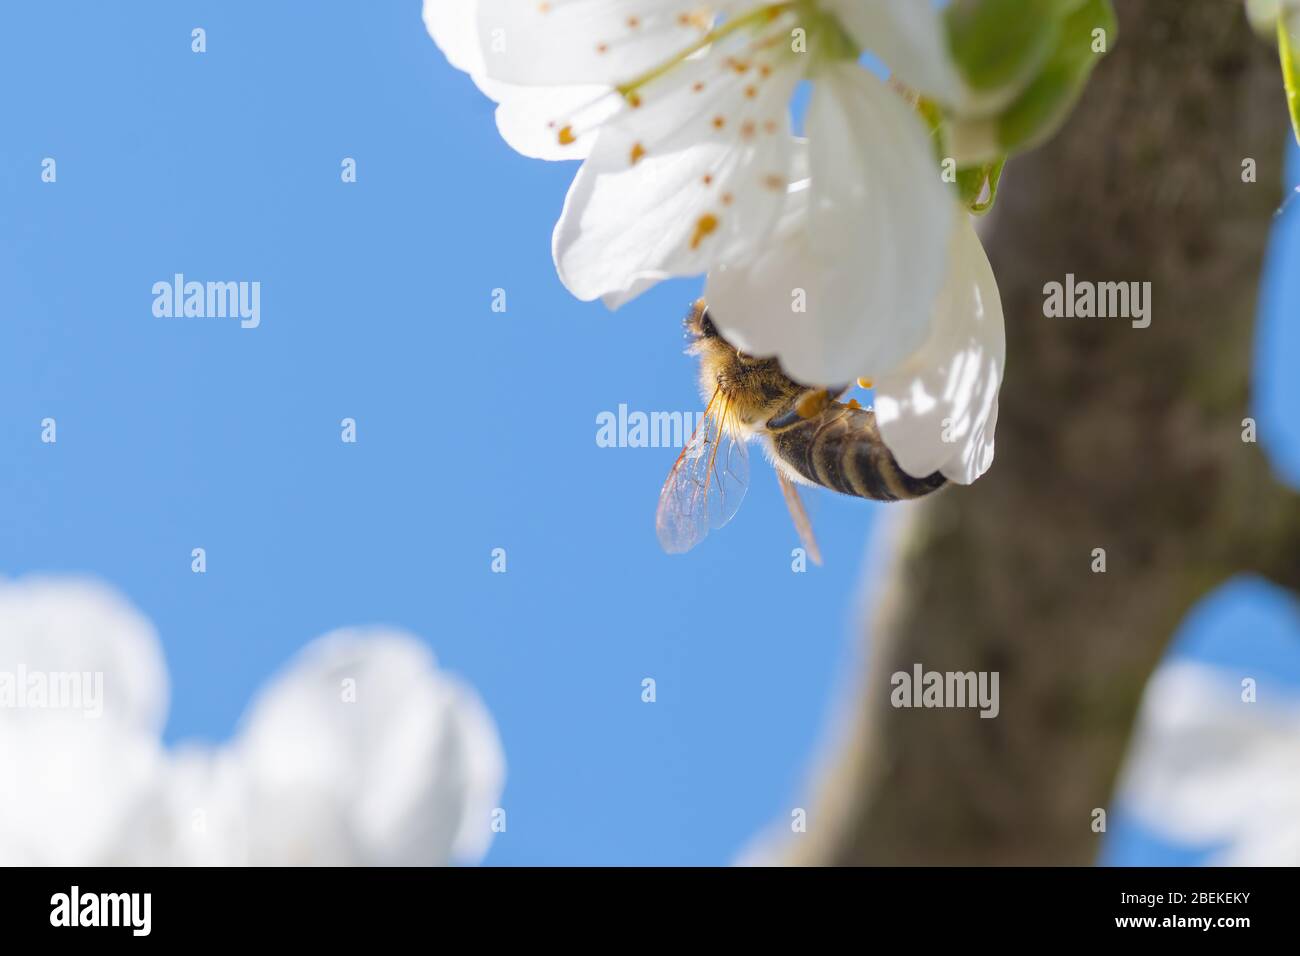 European honey bee pollinating blooming white cherry blossoms. Insects, agriculture, botany and season concepts Stock Photo